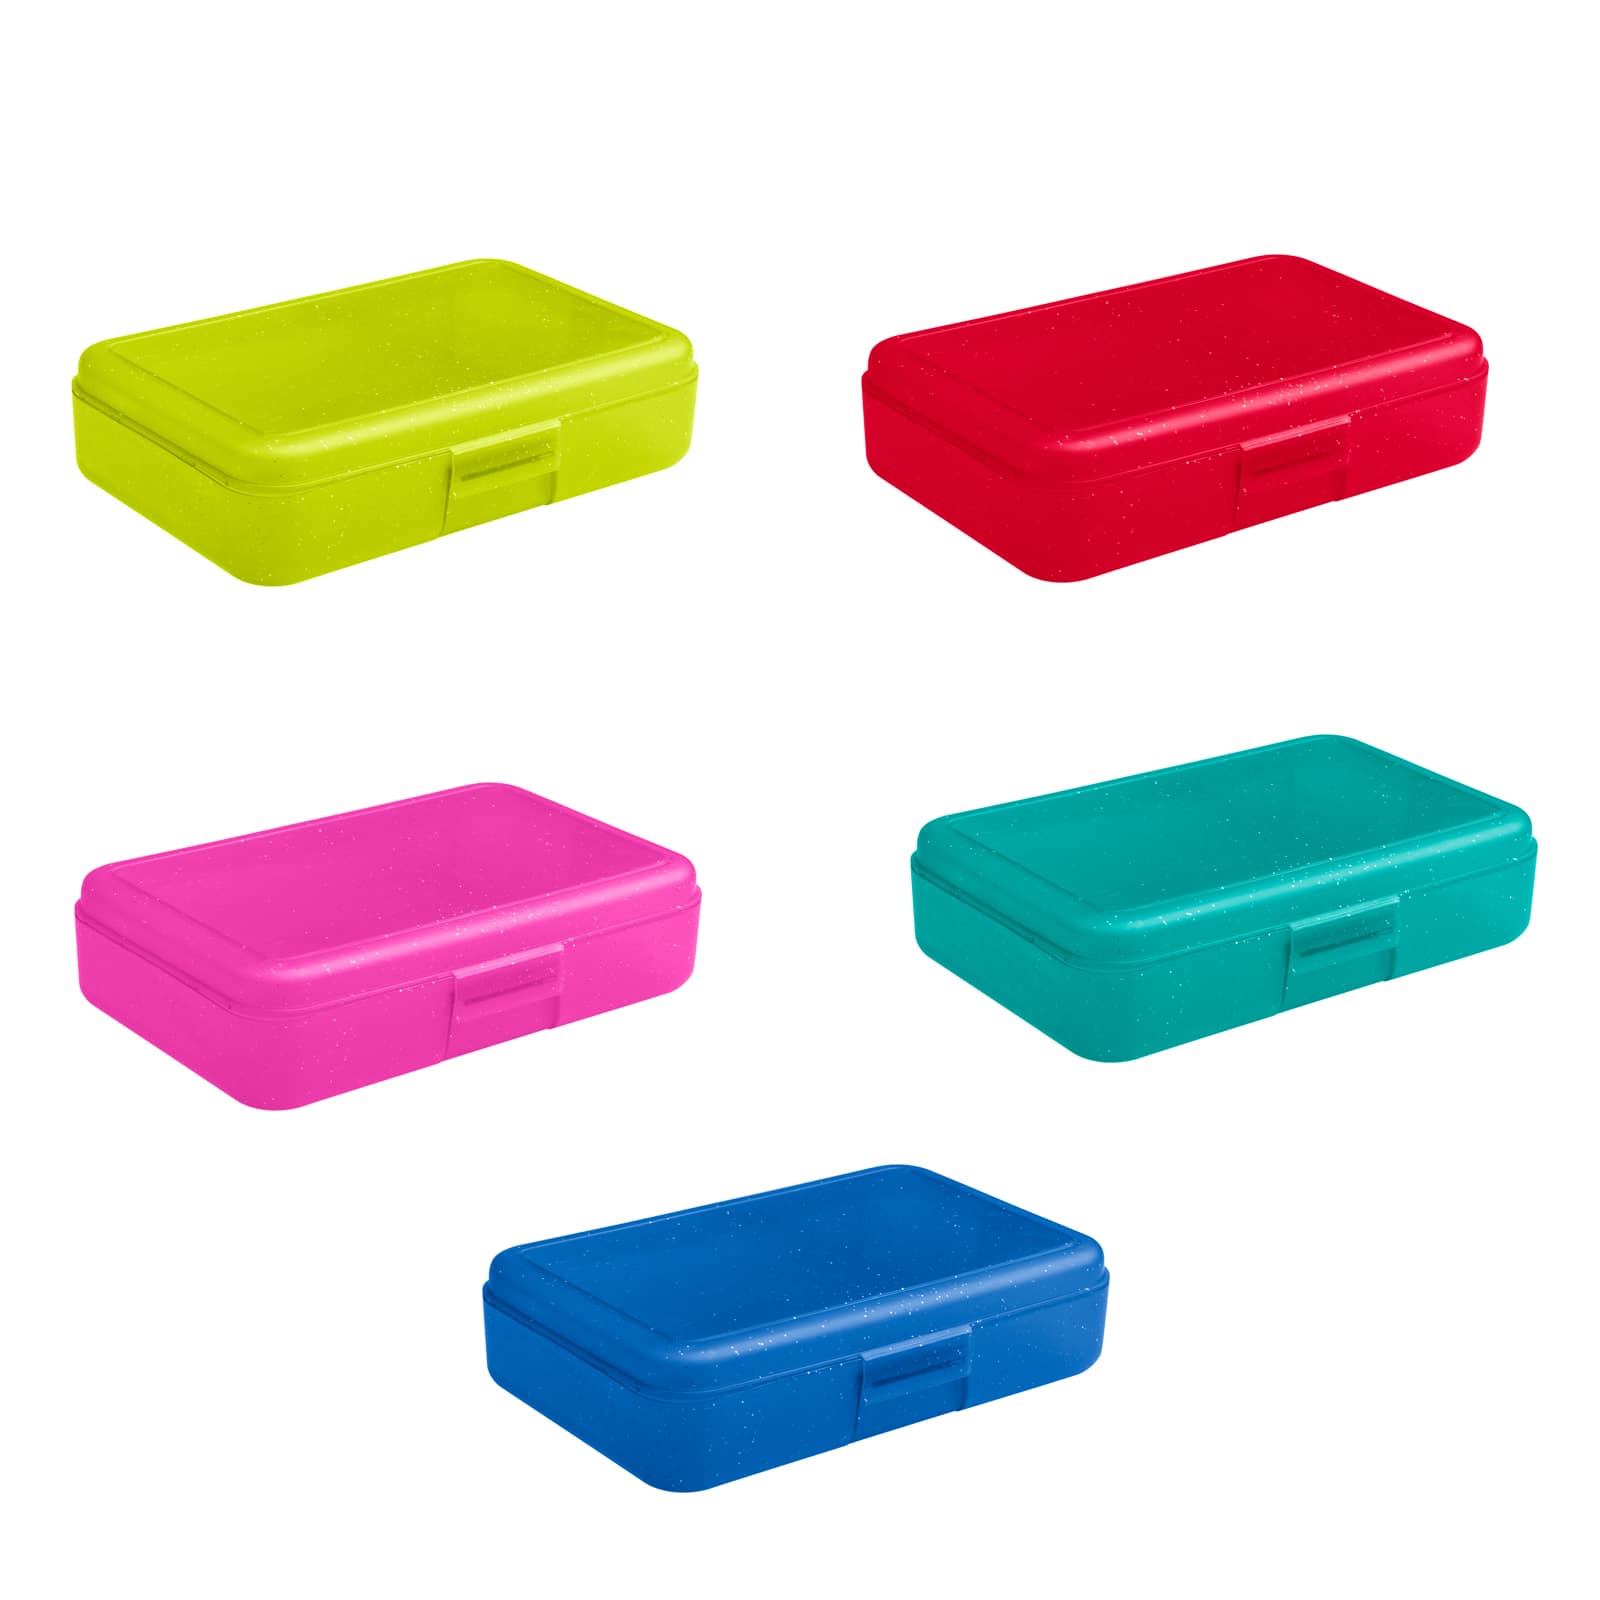 Find Assorted Pencil Box by Creatology 